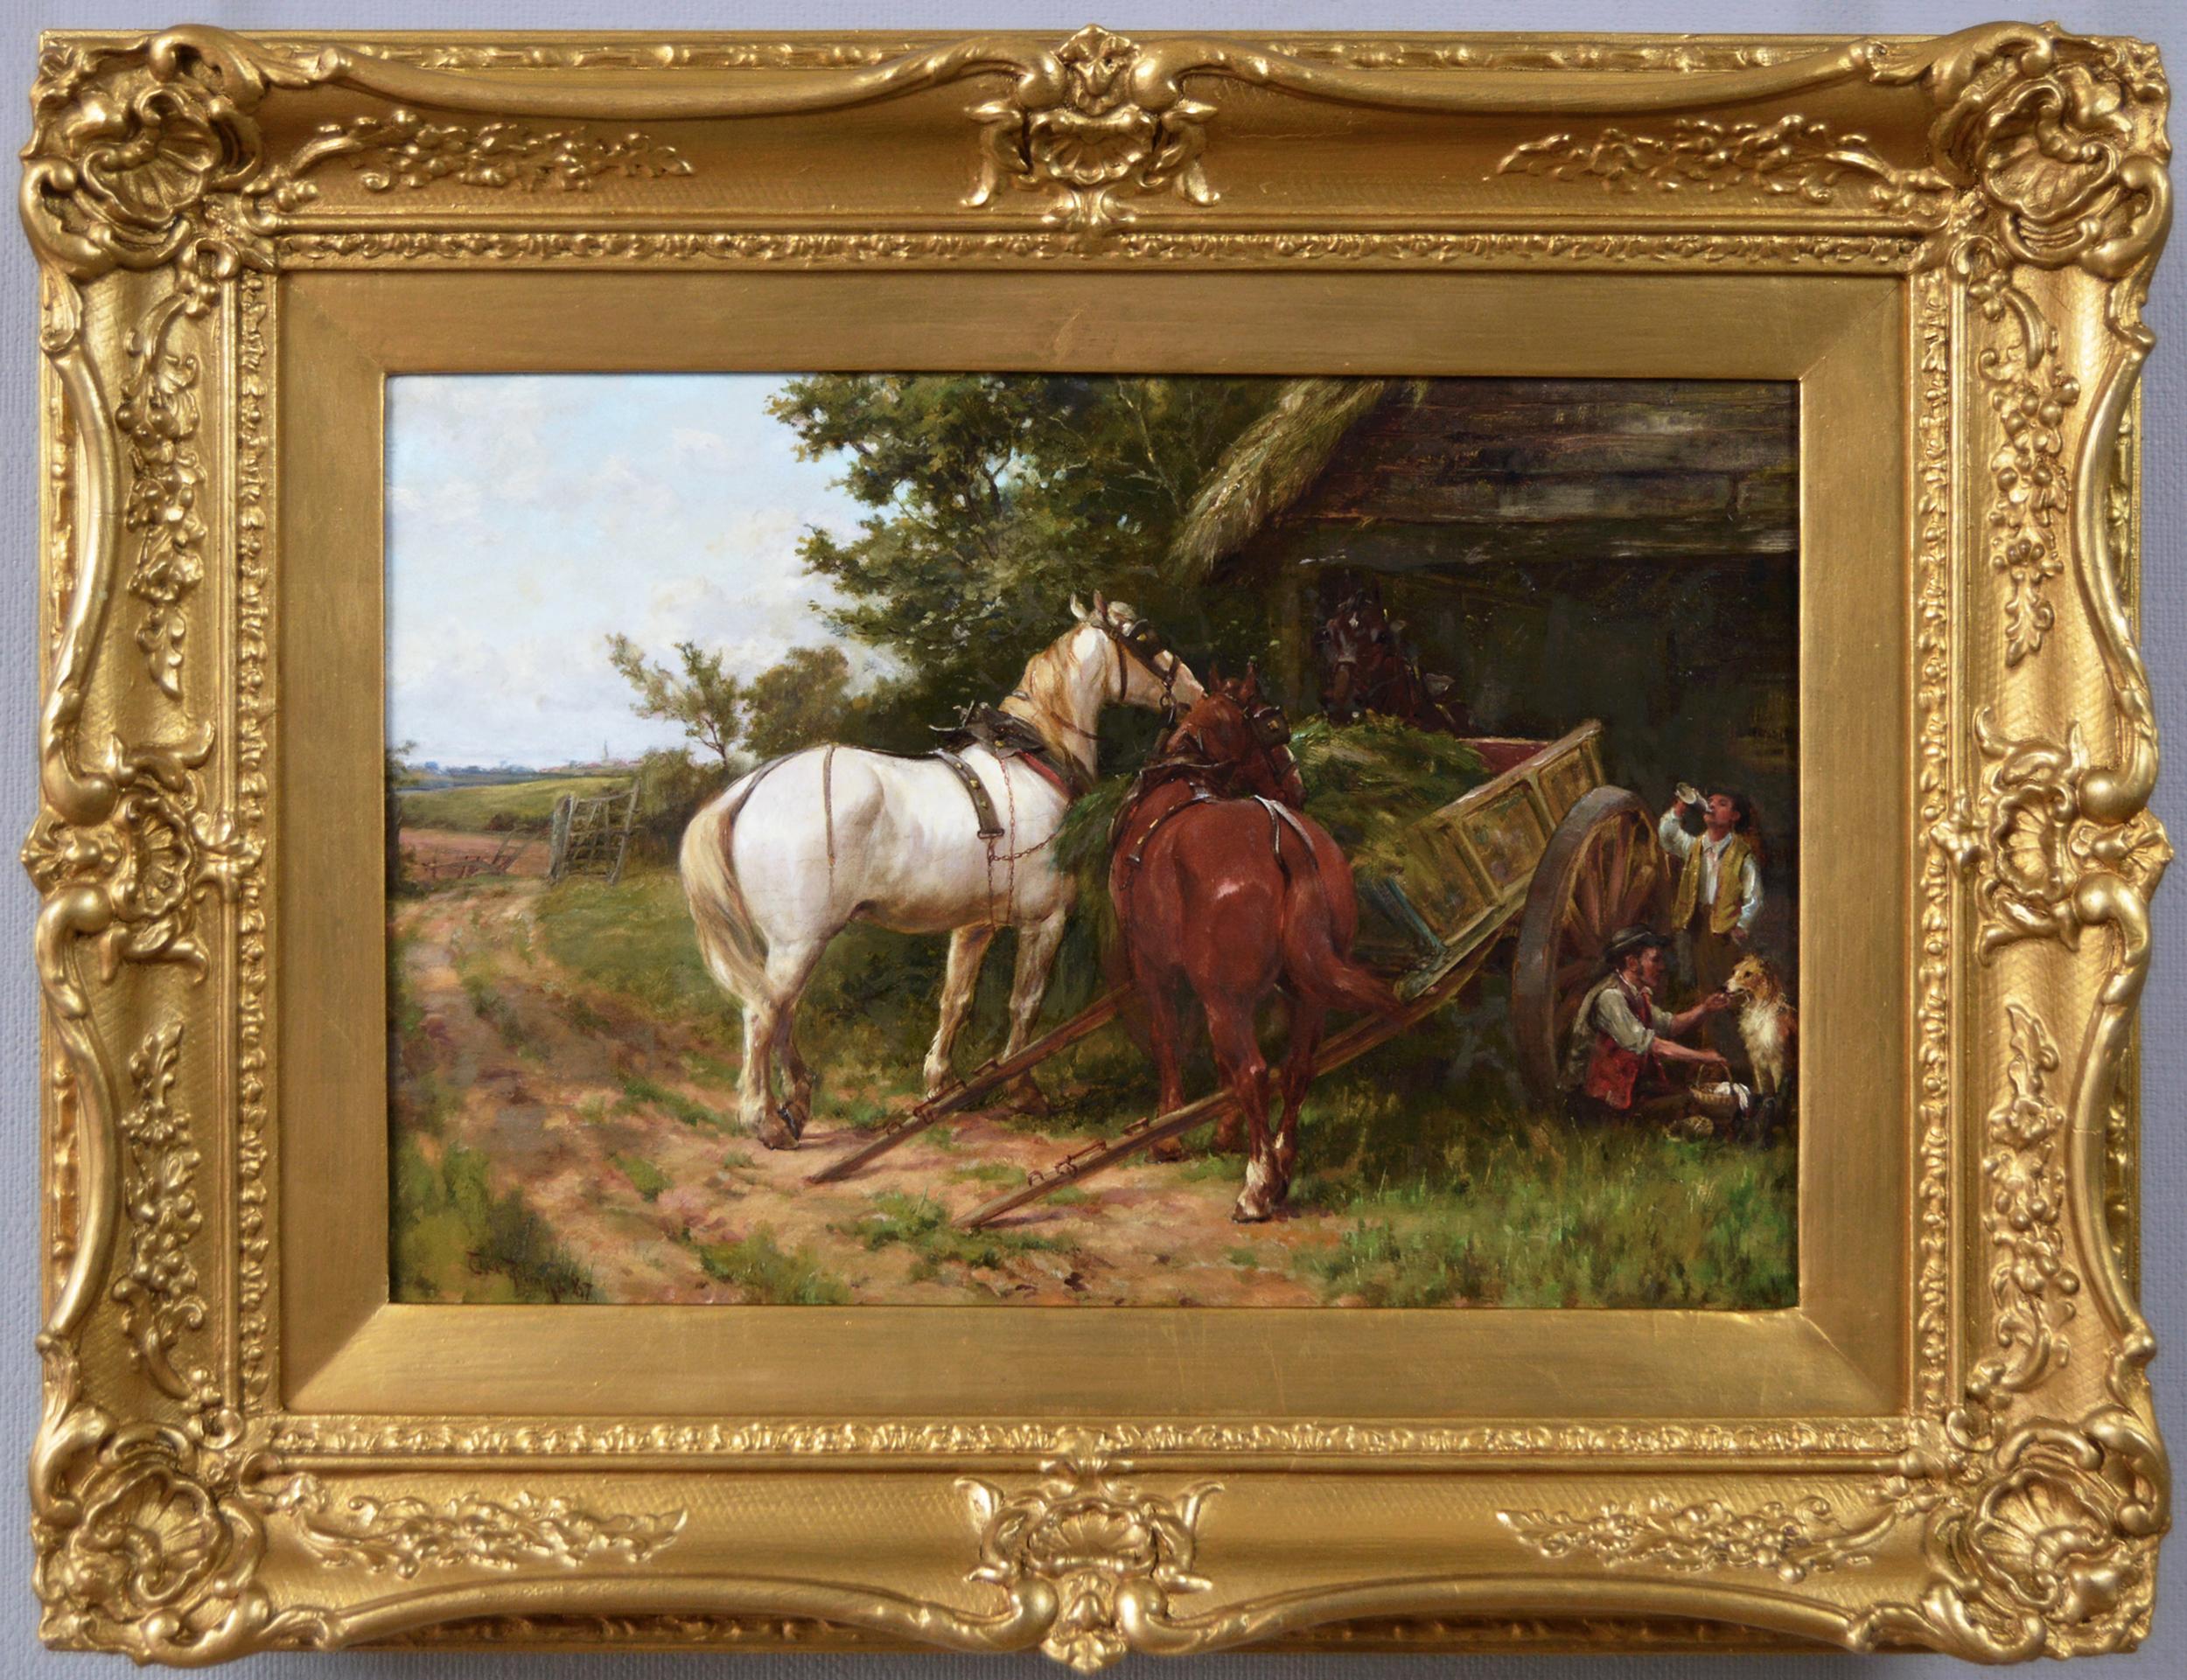 Thomas Blinks Landscape Painting - 19th Century landscape oil painting of horses near a barn with figures & a dog